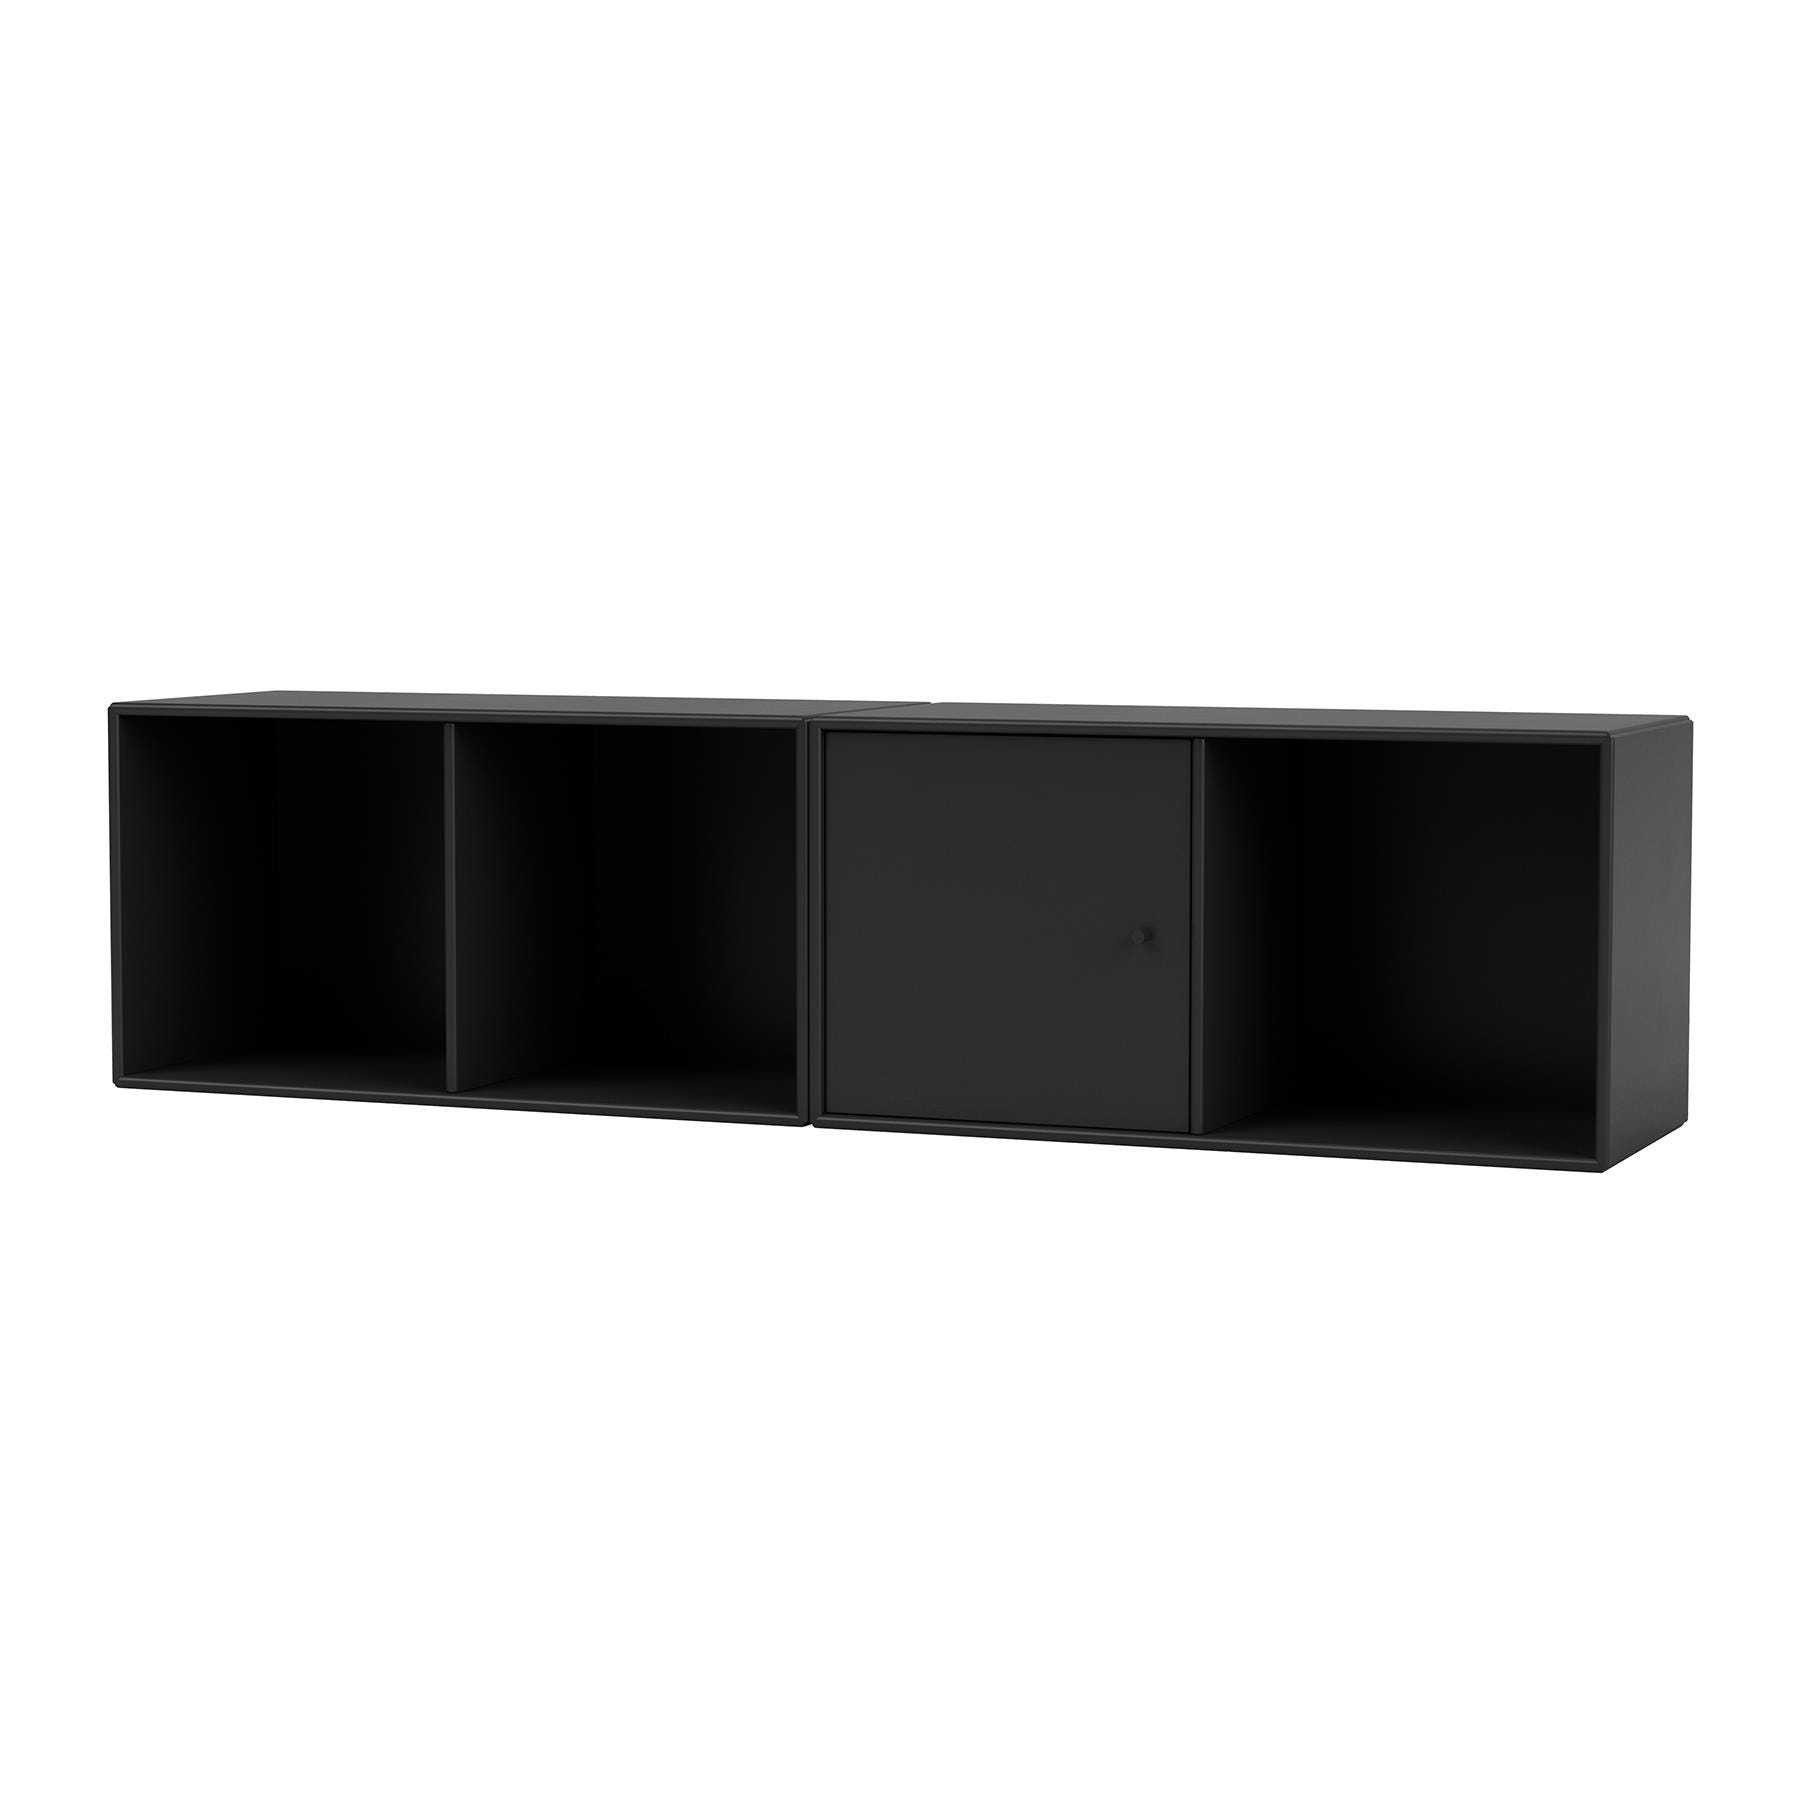 Montana Line Sideboard Black Wall Mounted Black Designer Furniture From Holloways Of Ludlow